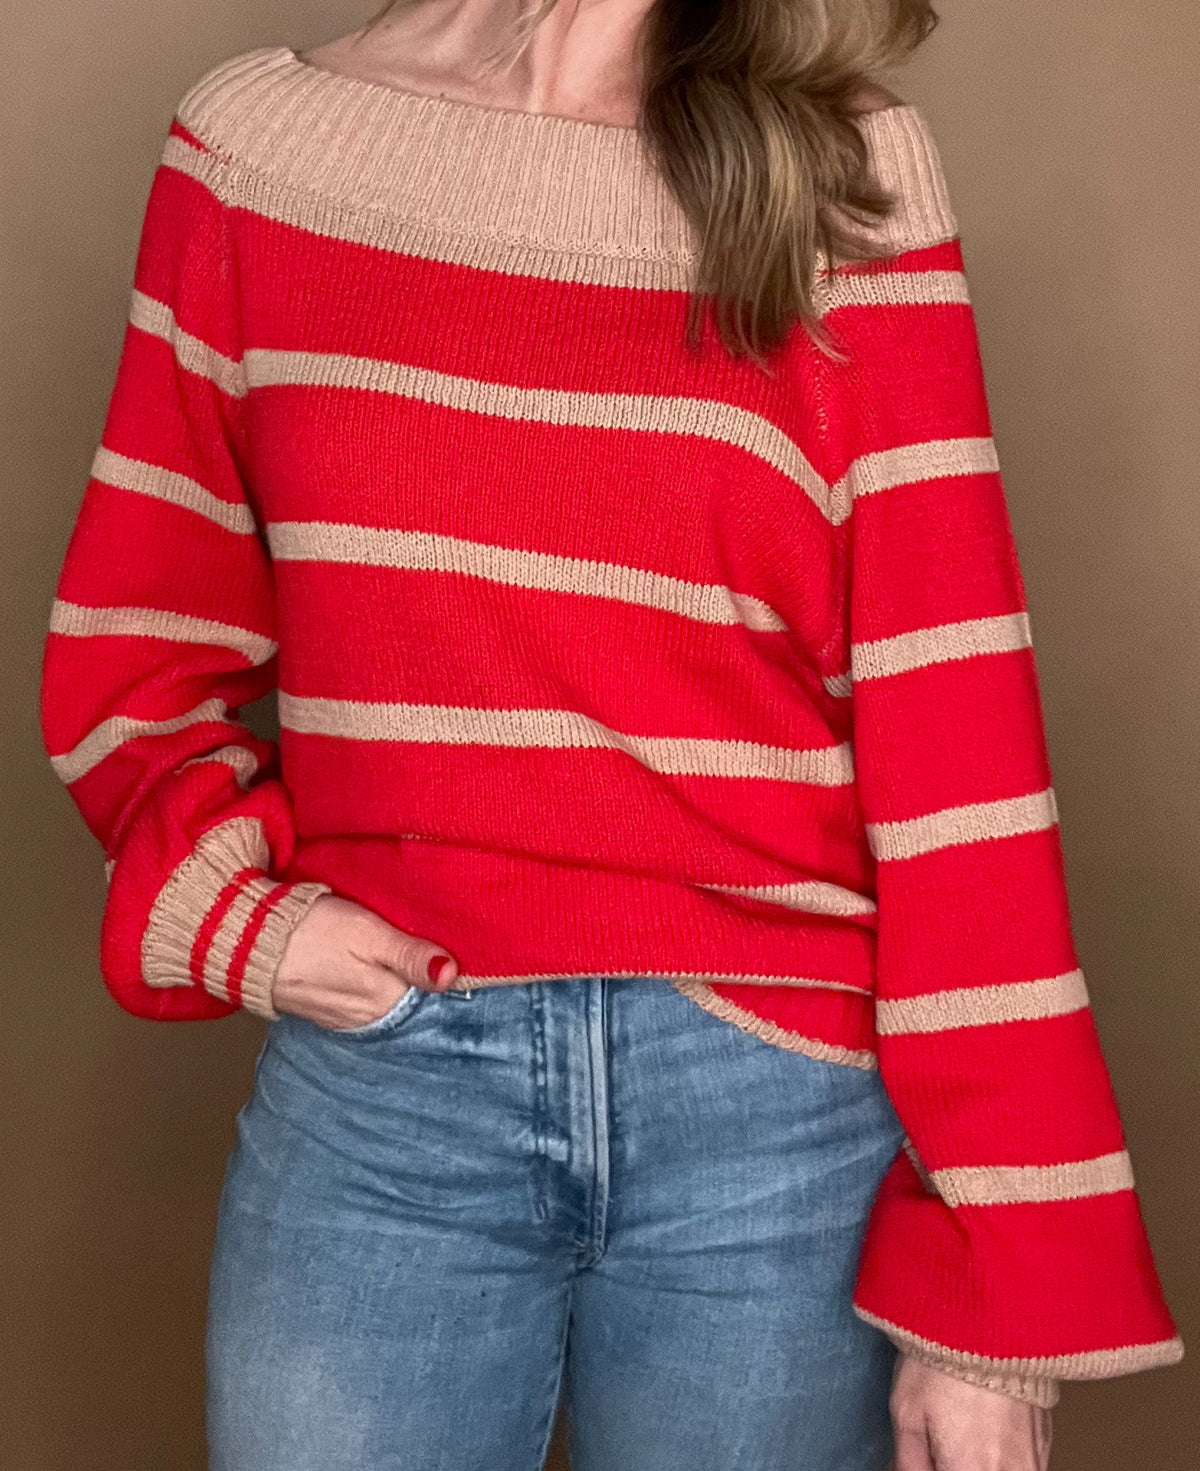 This gorgeous blend of tan and red is not only effortlessly stylish, but also made from comfortable cotton for a cozy lunch date or for a night out. The slightly belled sleeves add a touch of romance to complete your look.&nbsp;Pair this beauty with faded denim for an easy look.